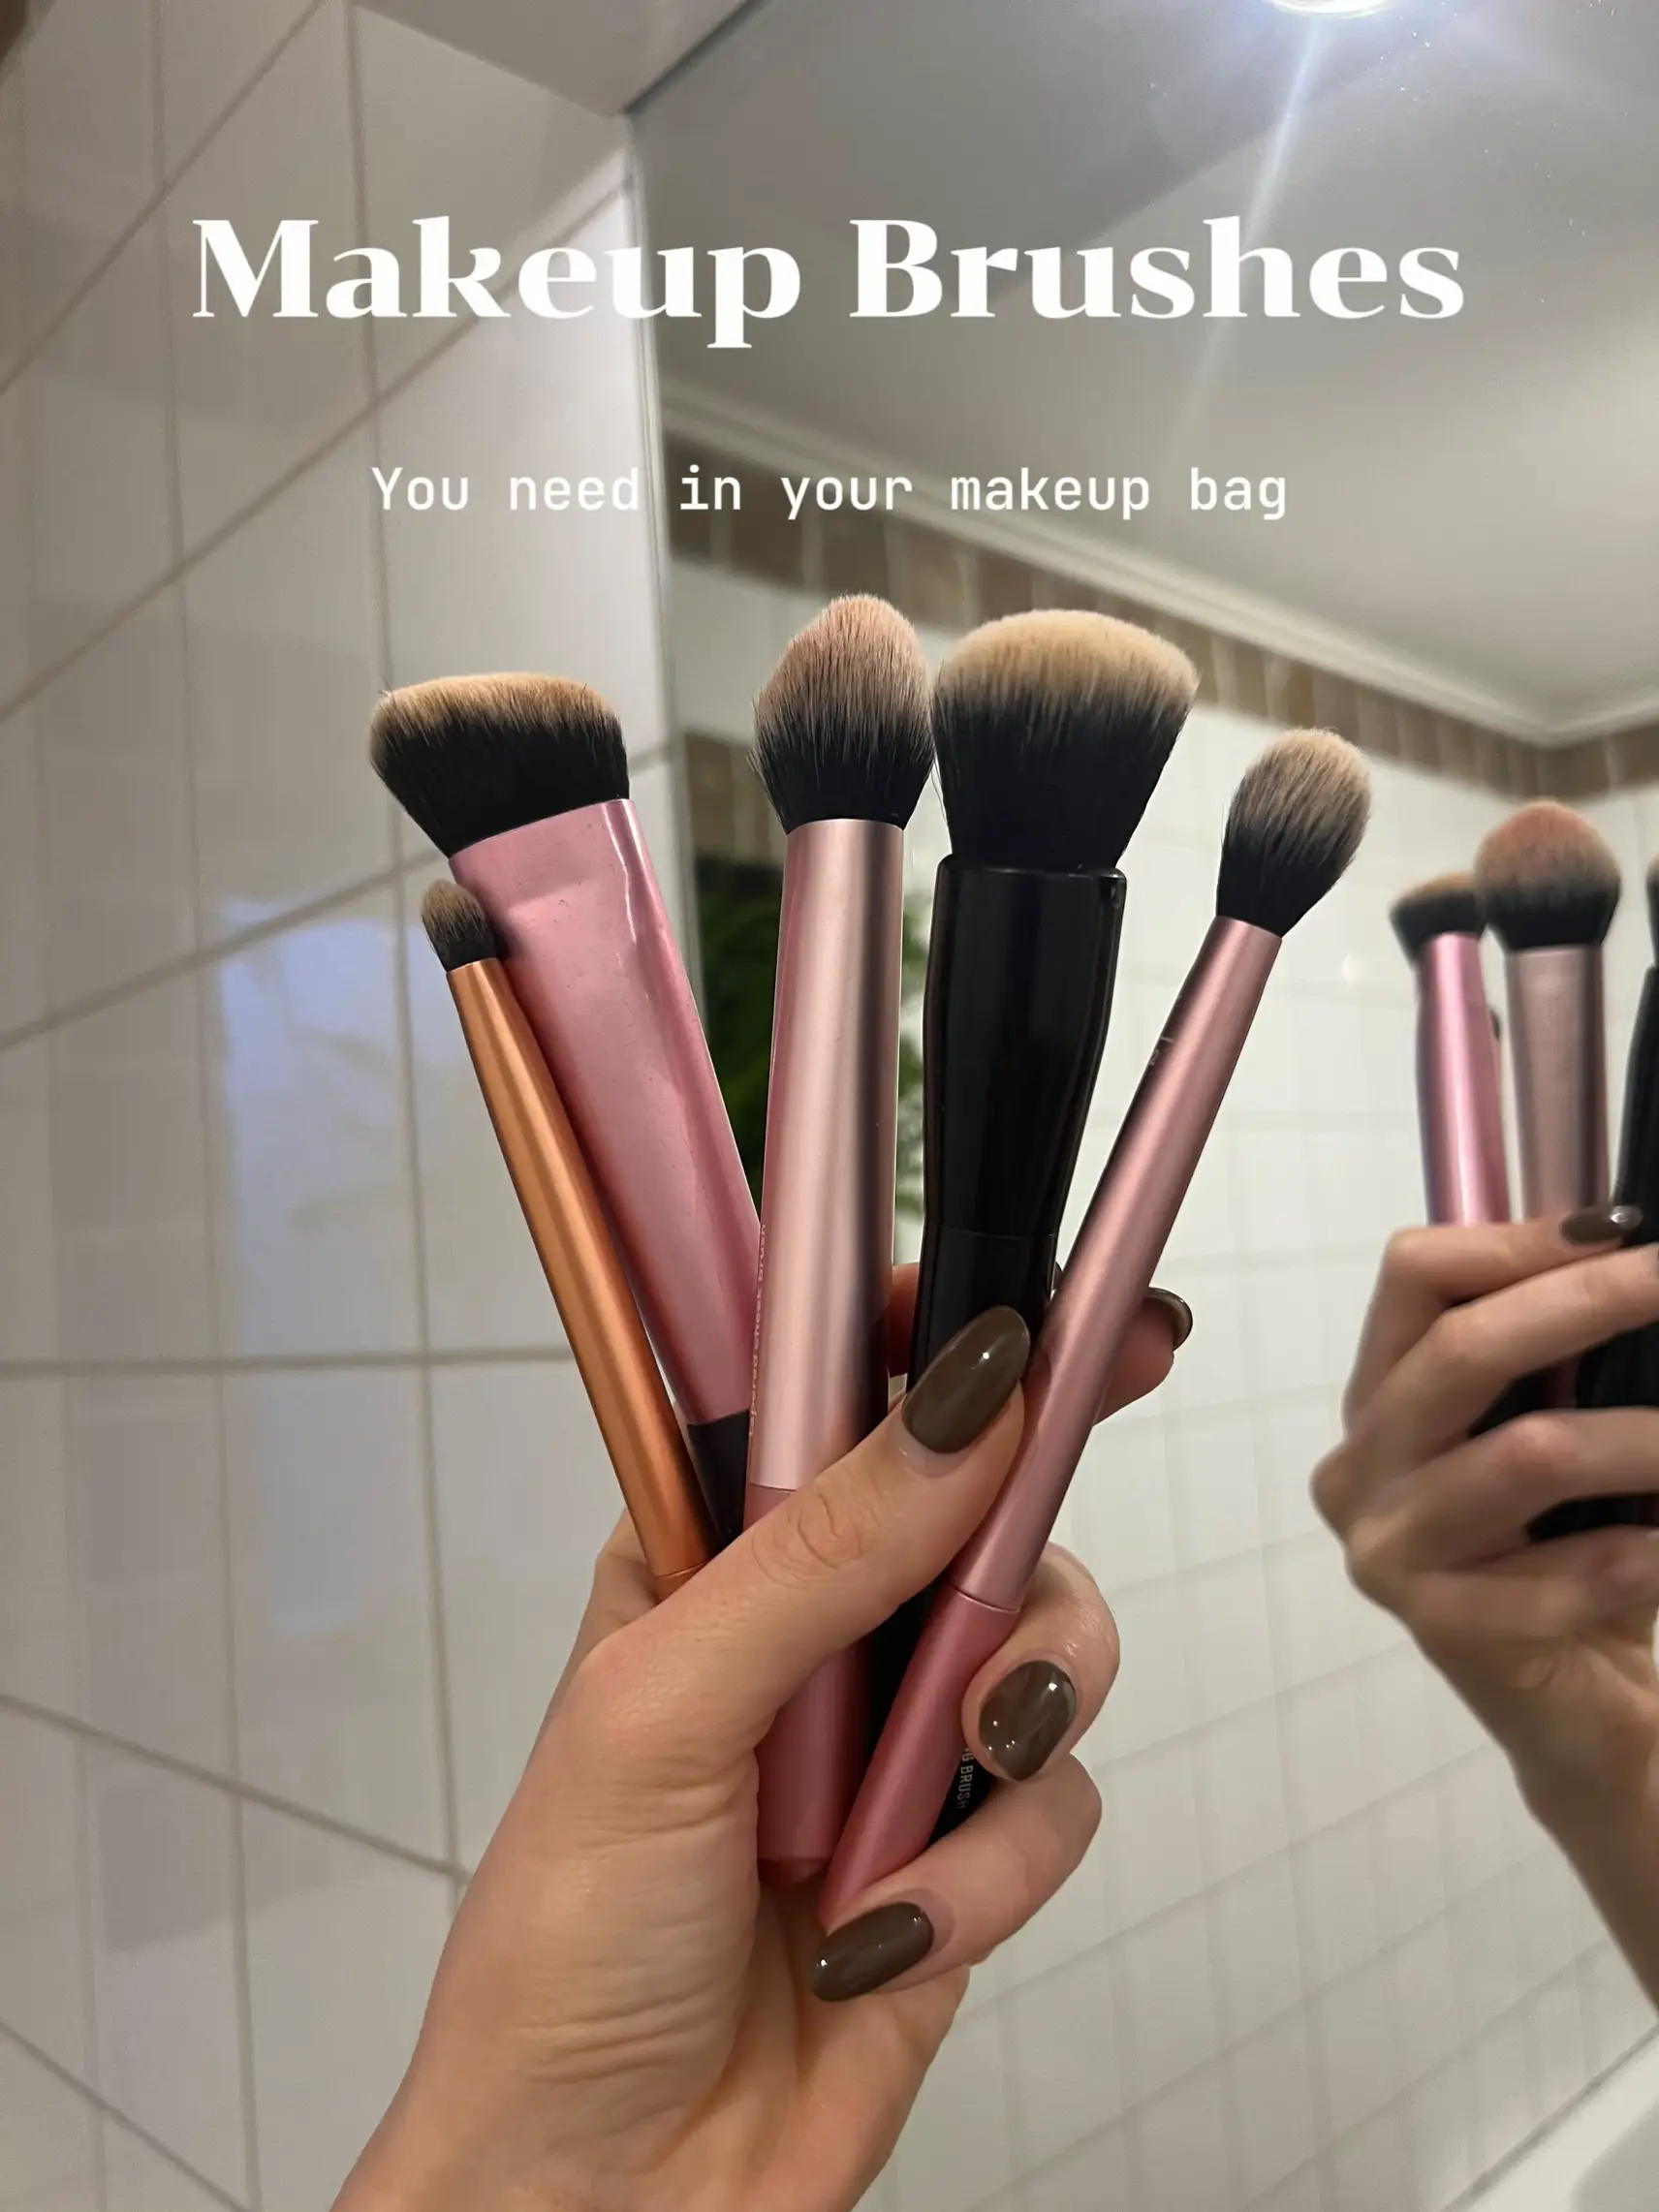 Should you apply your makeup with a brush or your fingers?